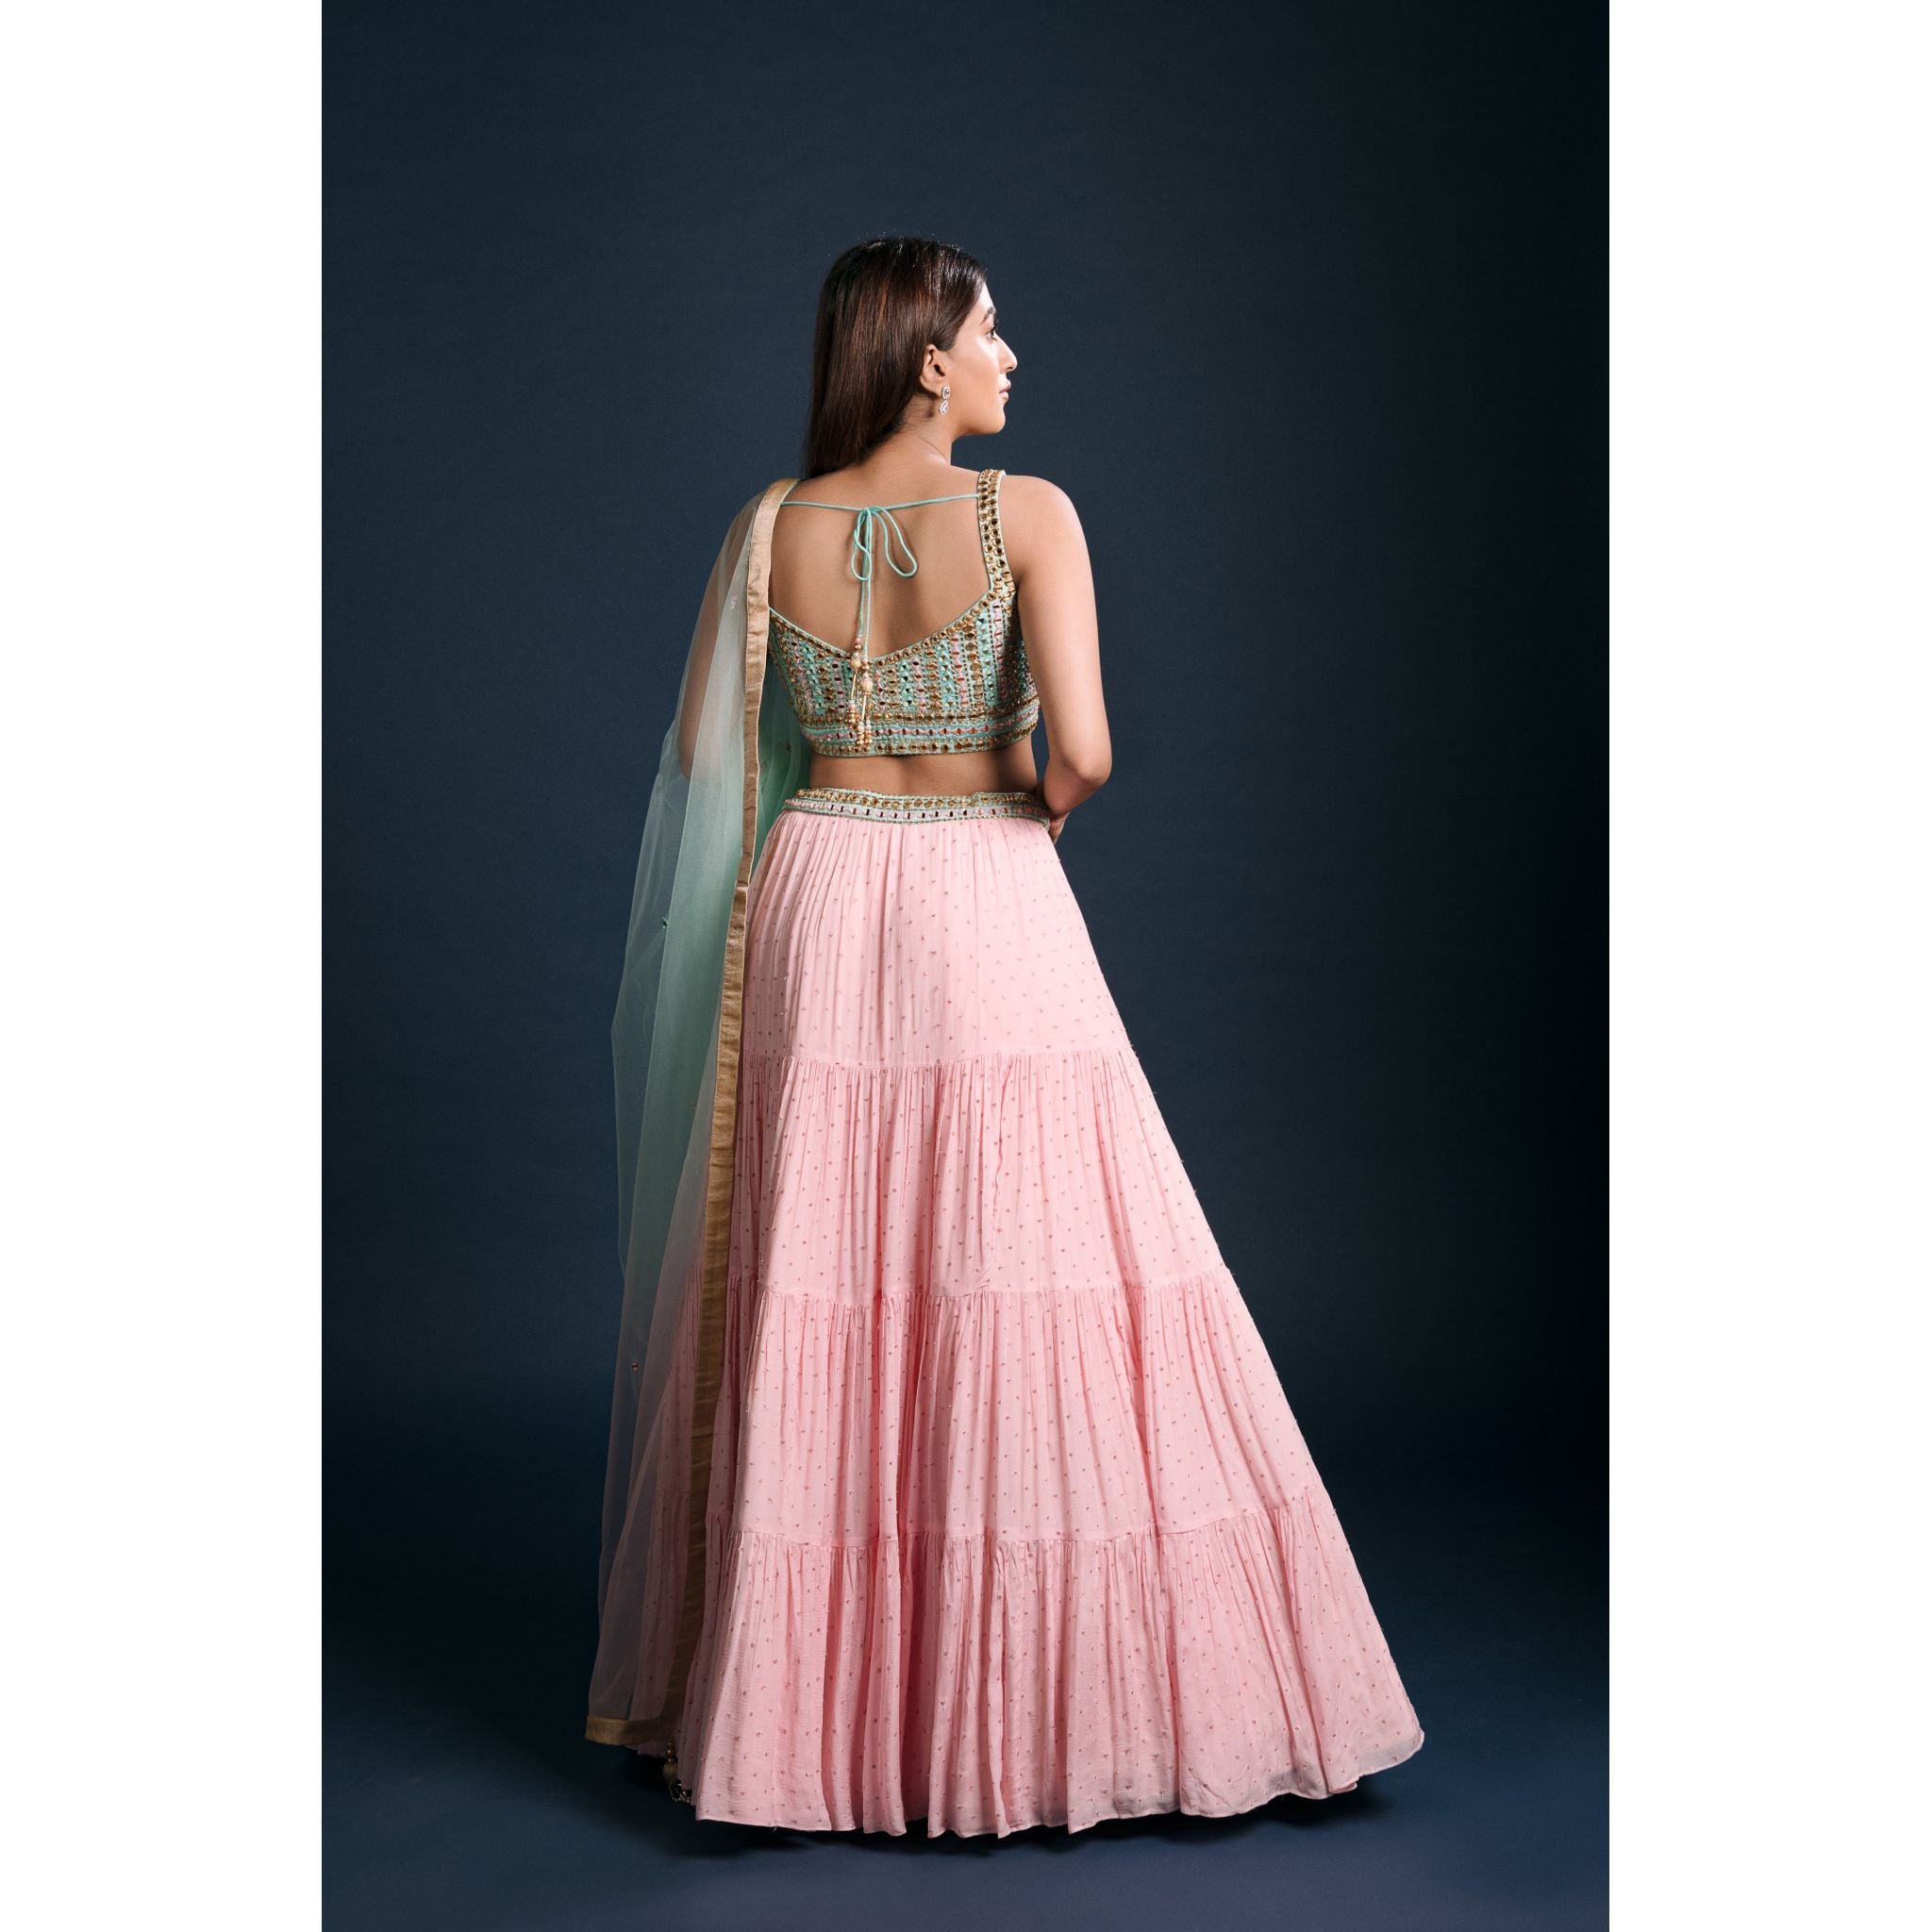 Turquoise And Pink Tiered Lehenga Set - Indian Designer Bridal Wedding Outfit